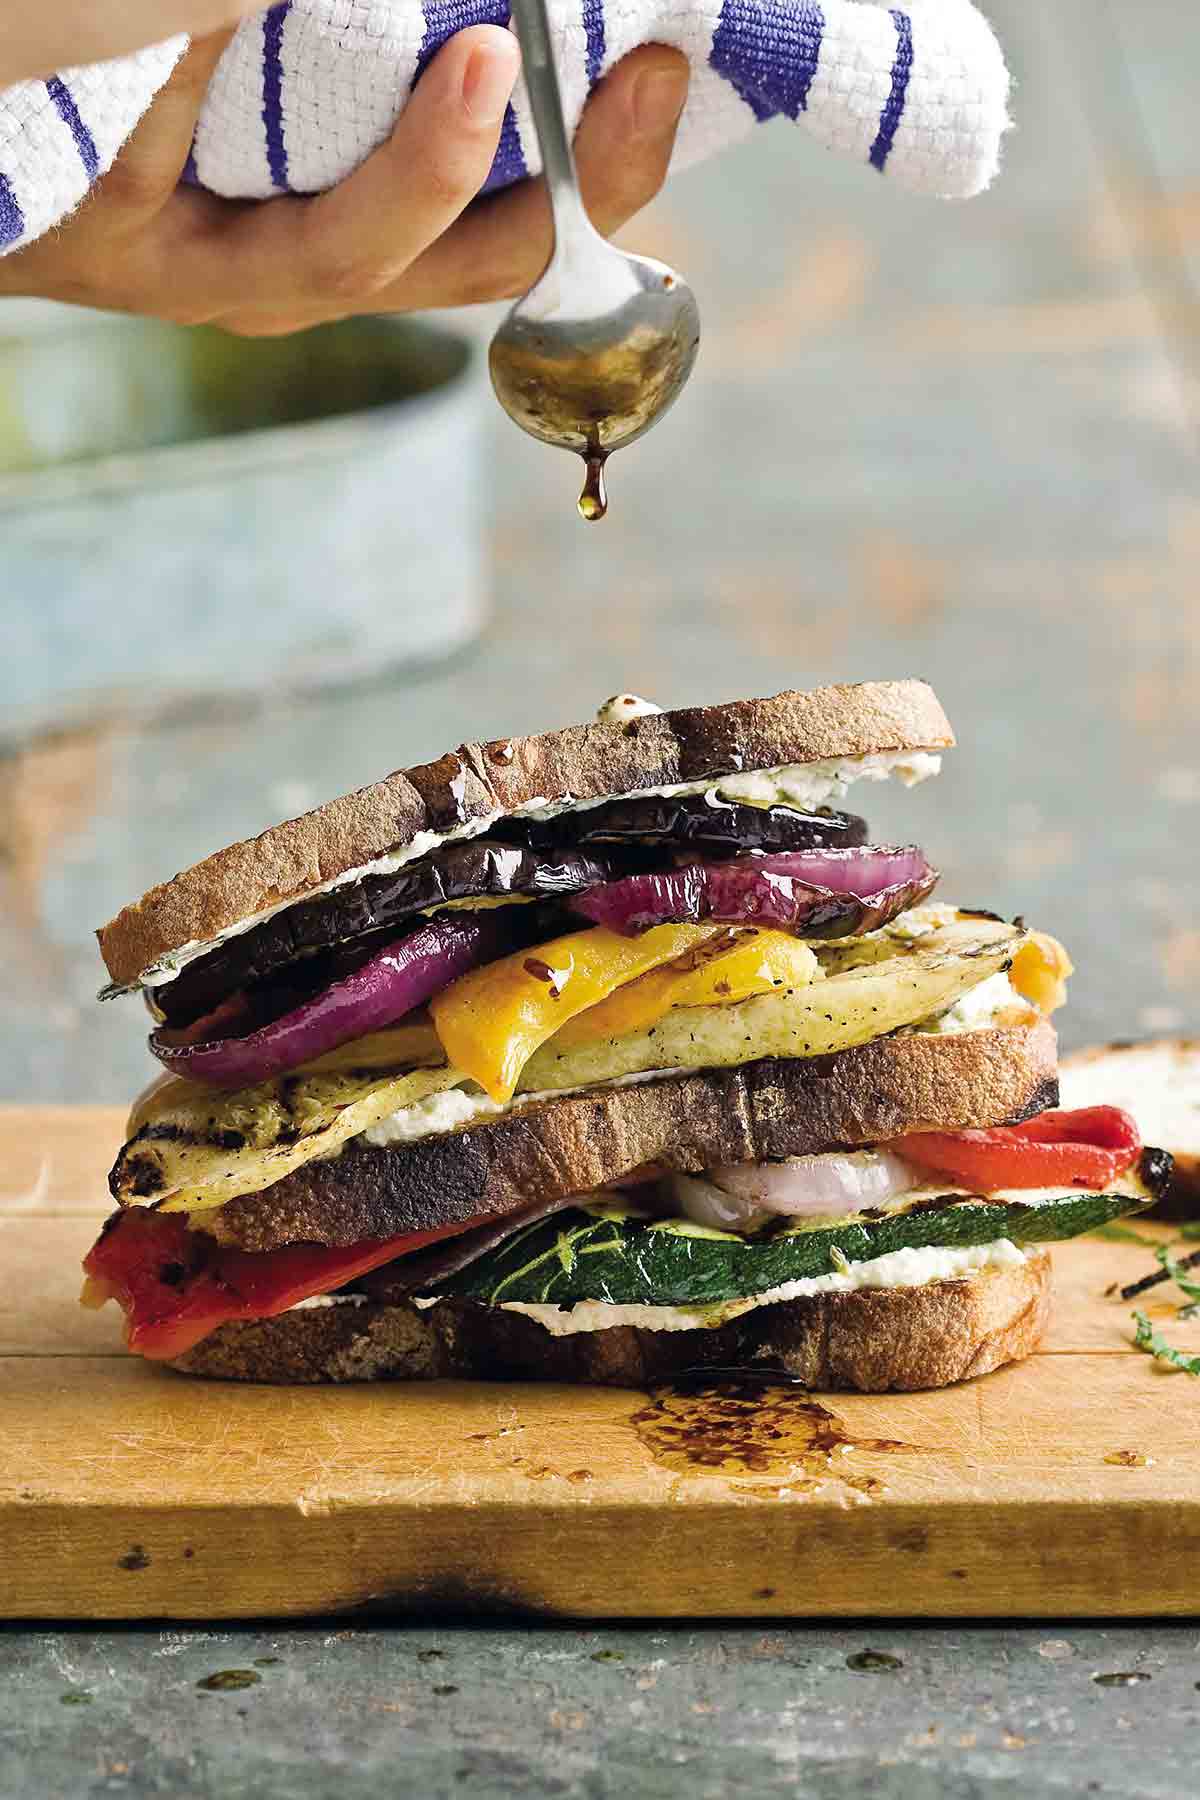 A grilled vegetable sandwich on a wooden cutting board.